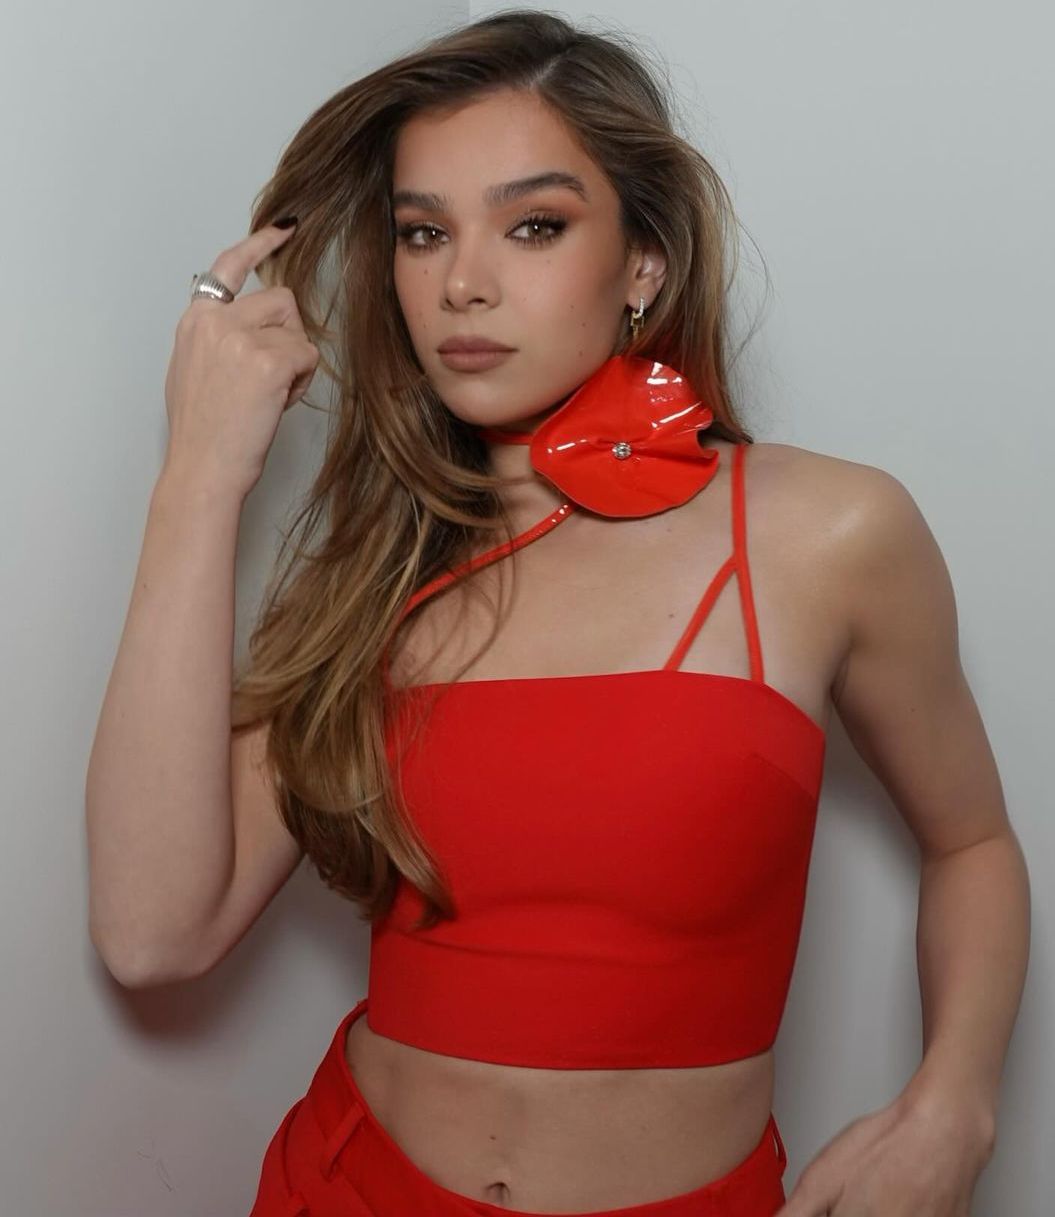 Hailee Steinfeld Biography, Age, Height, Weight, Boyfriend, Family, Career, and More